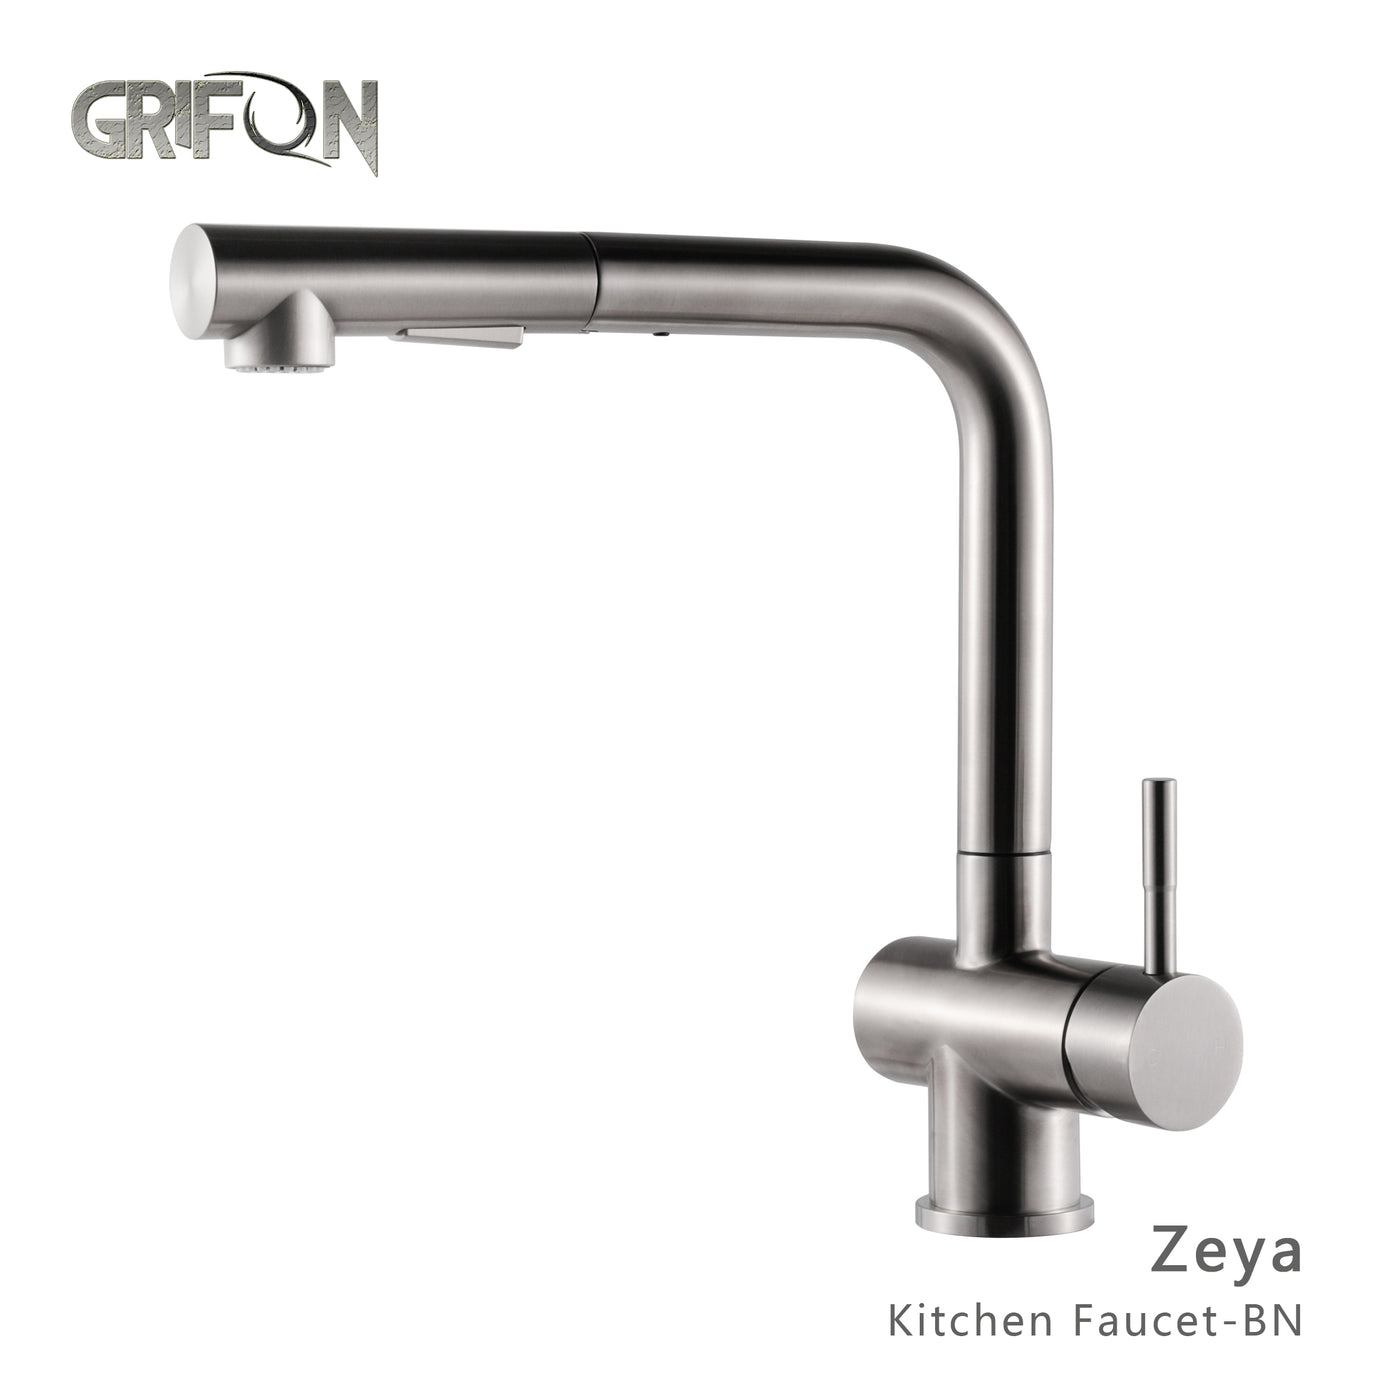 ZEYA™ GF405 Contemporary Style Single-Handle Kitchen Sink Faucet with Pull-Down Sprayer